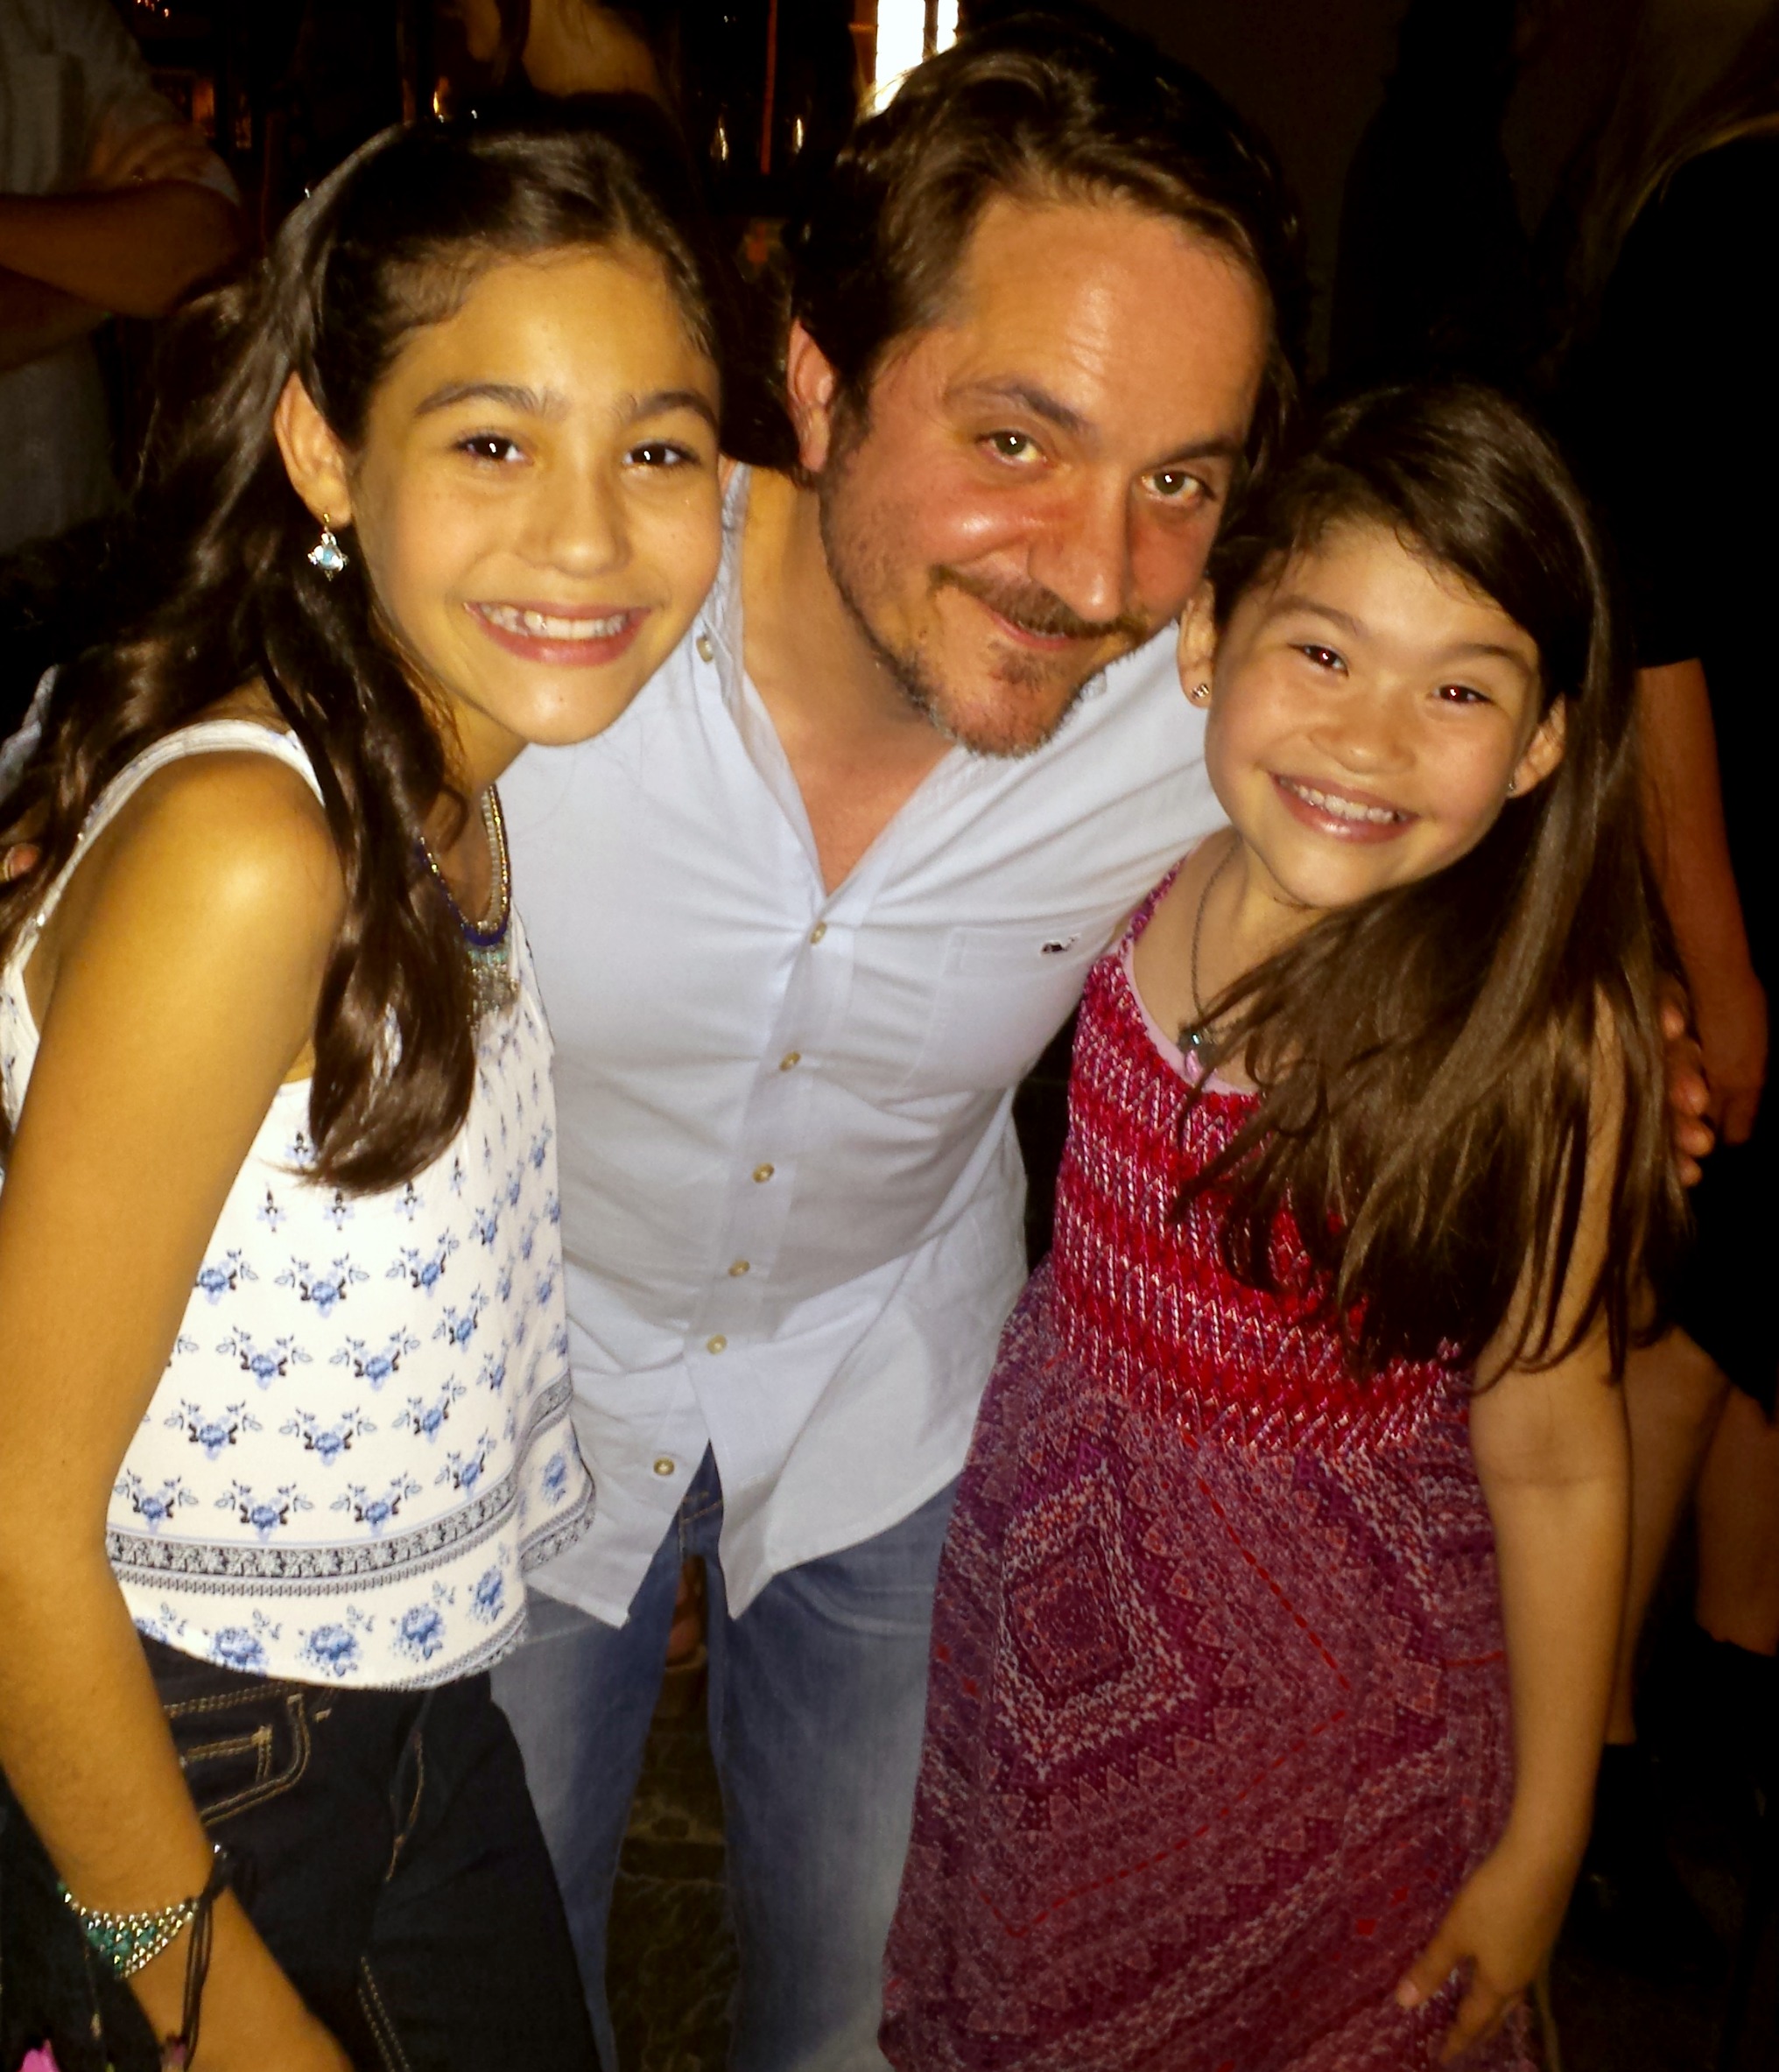 With Director Ben Falcone and Aleandra Newcomb at the Michelle Darnell wrap party.